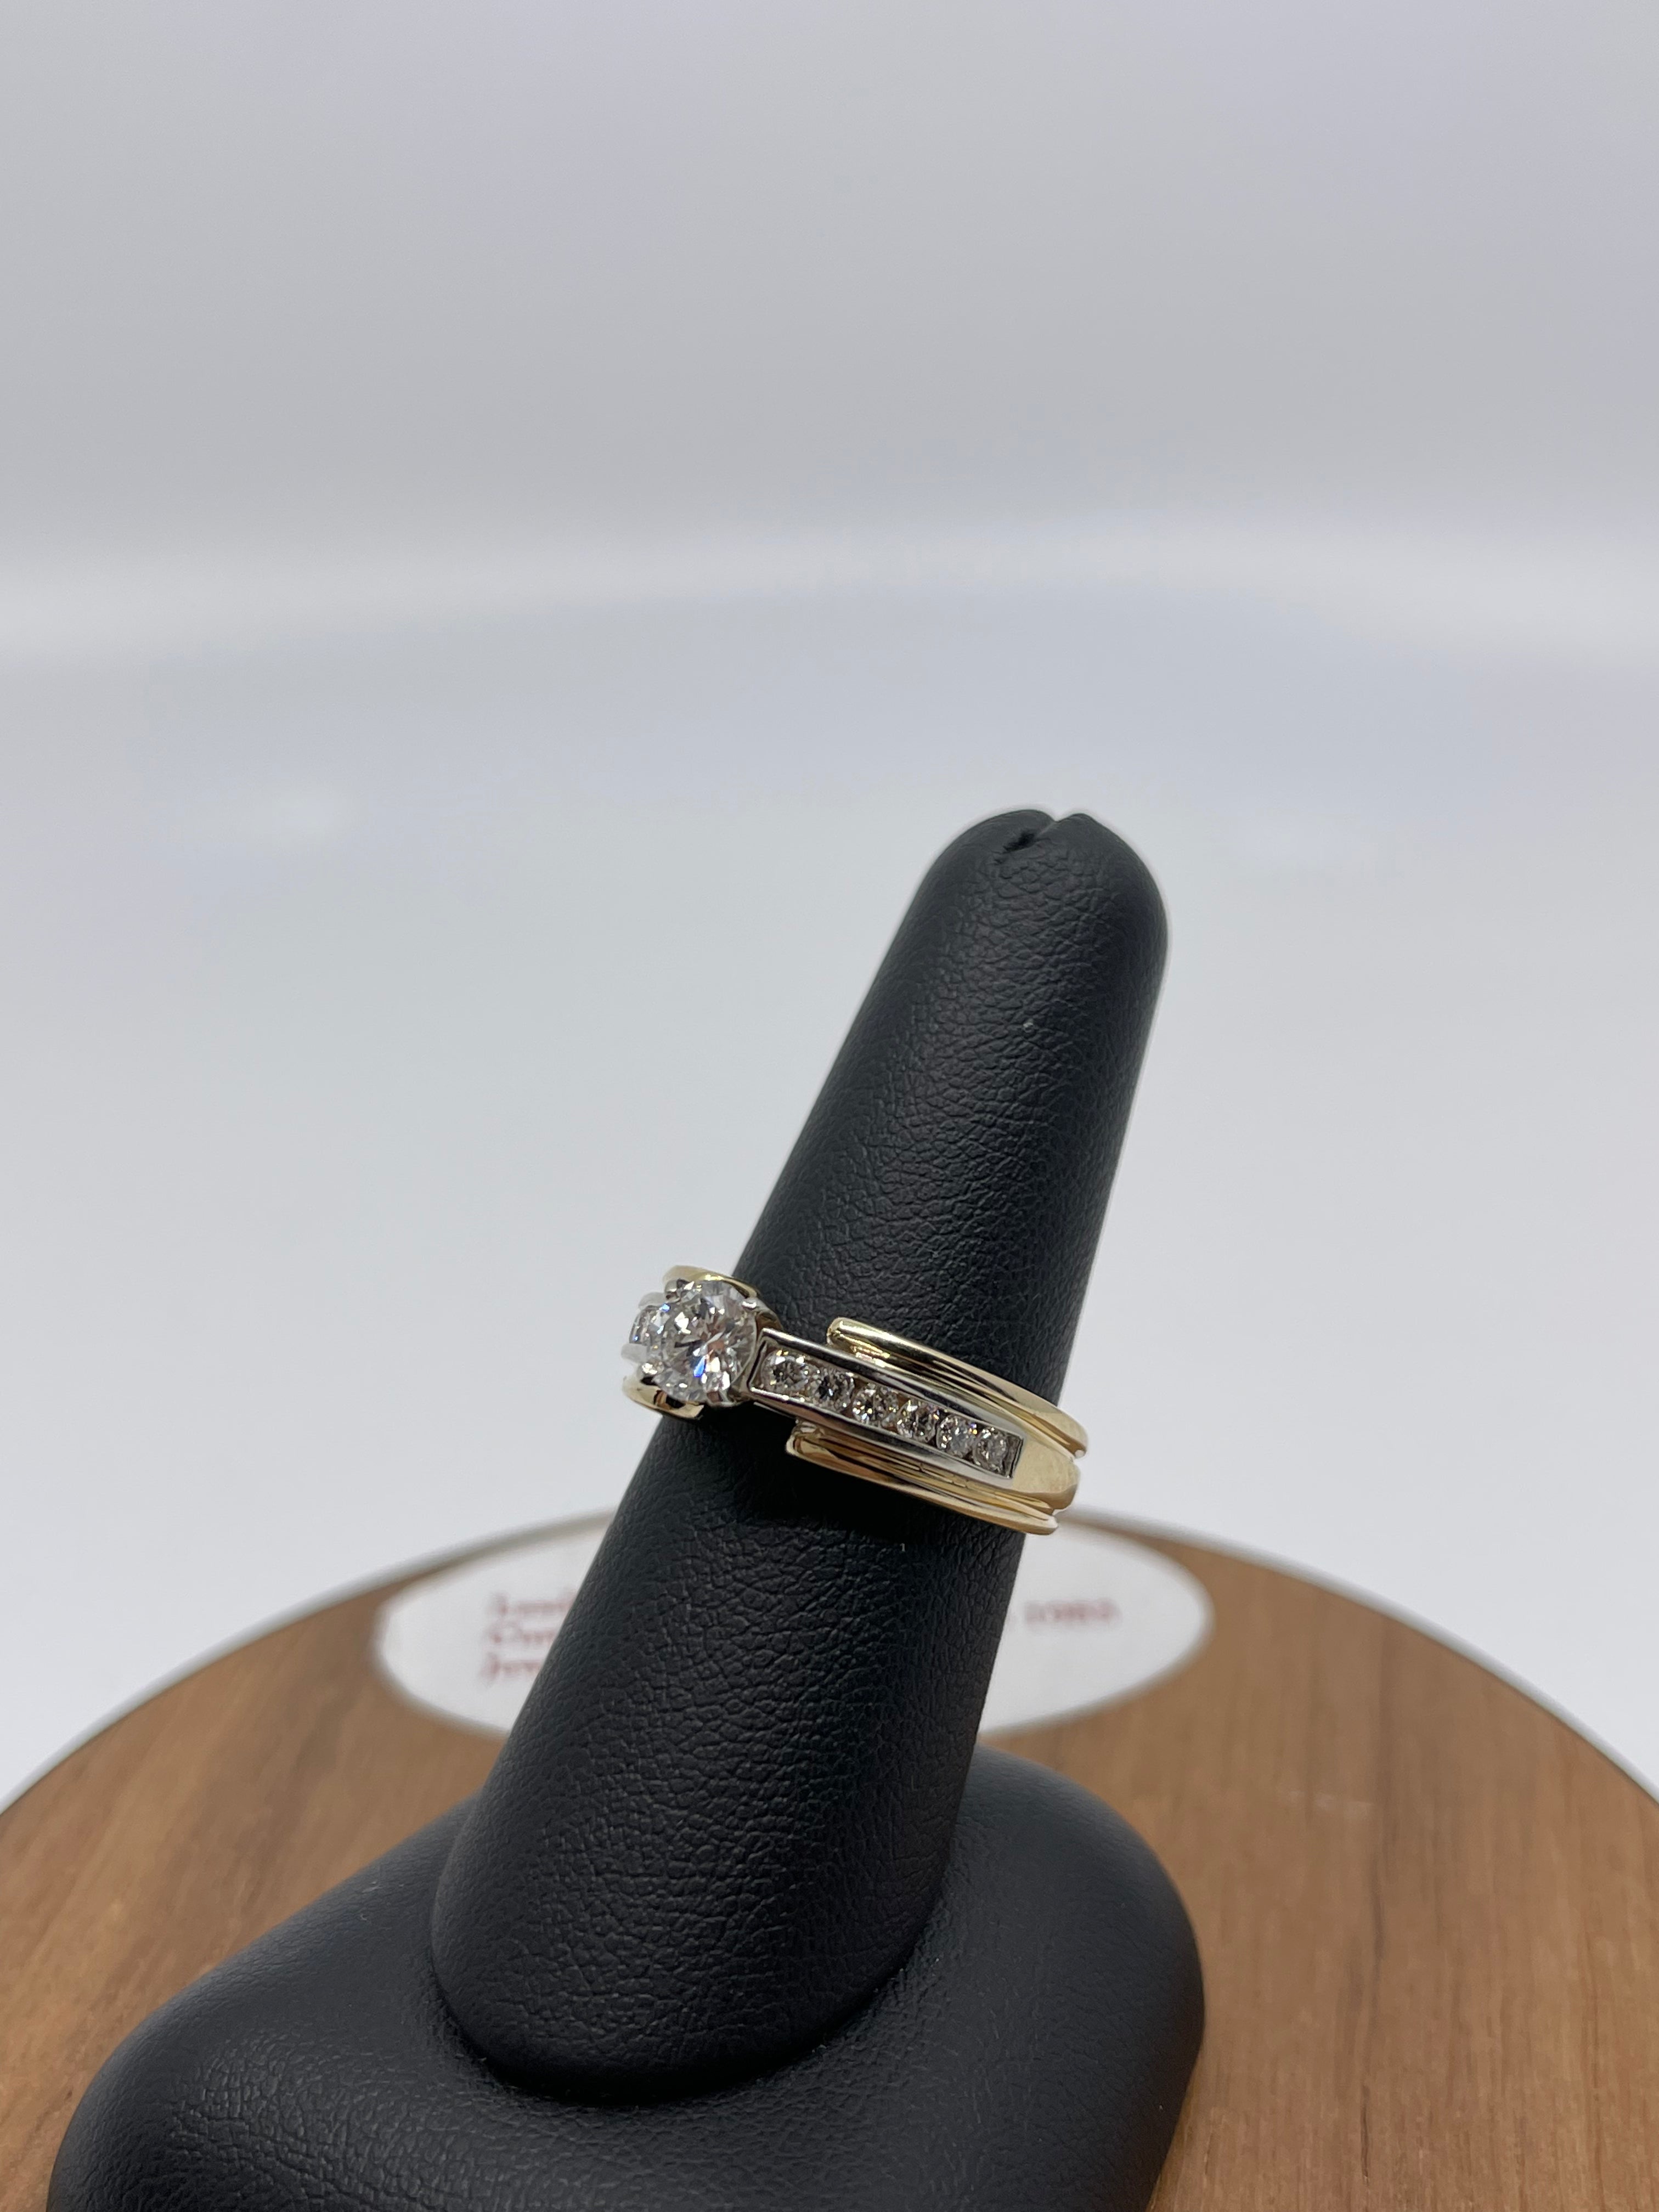 14K Yellow Gold 0.52 Carat Round Diamond Engagement Ring with VS2 Quality